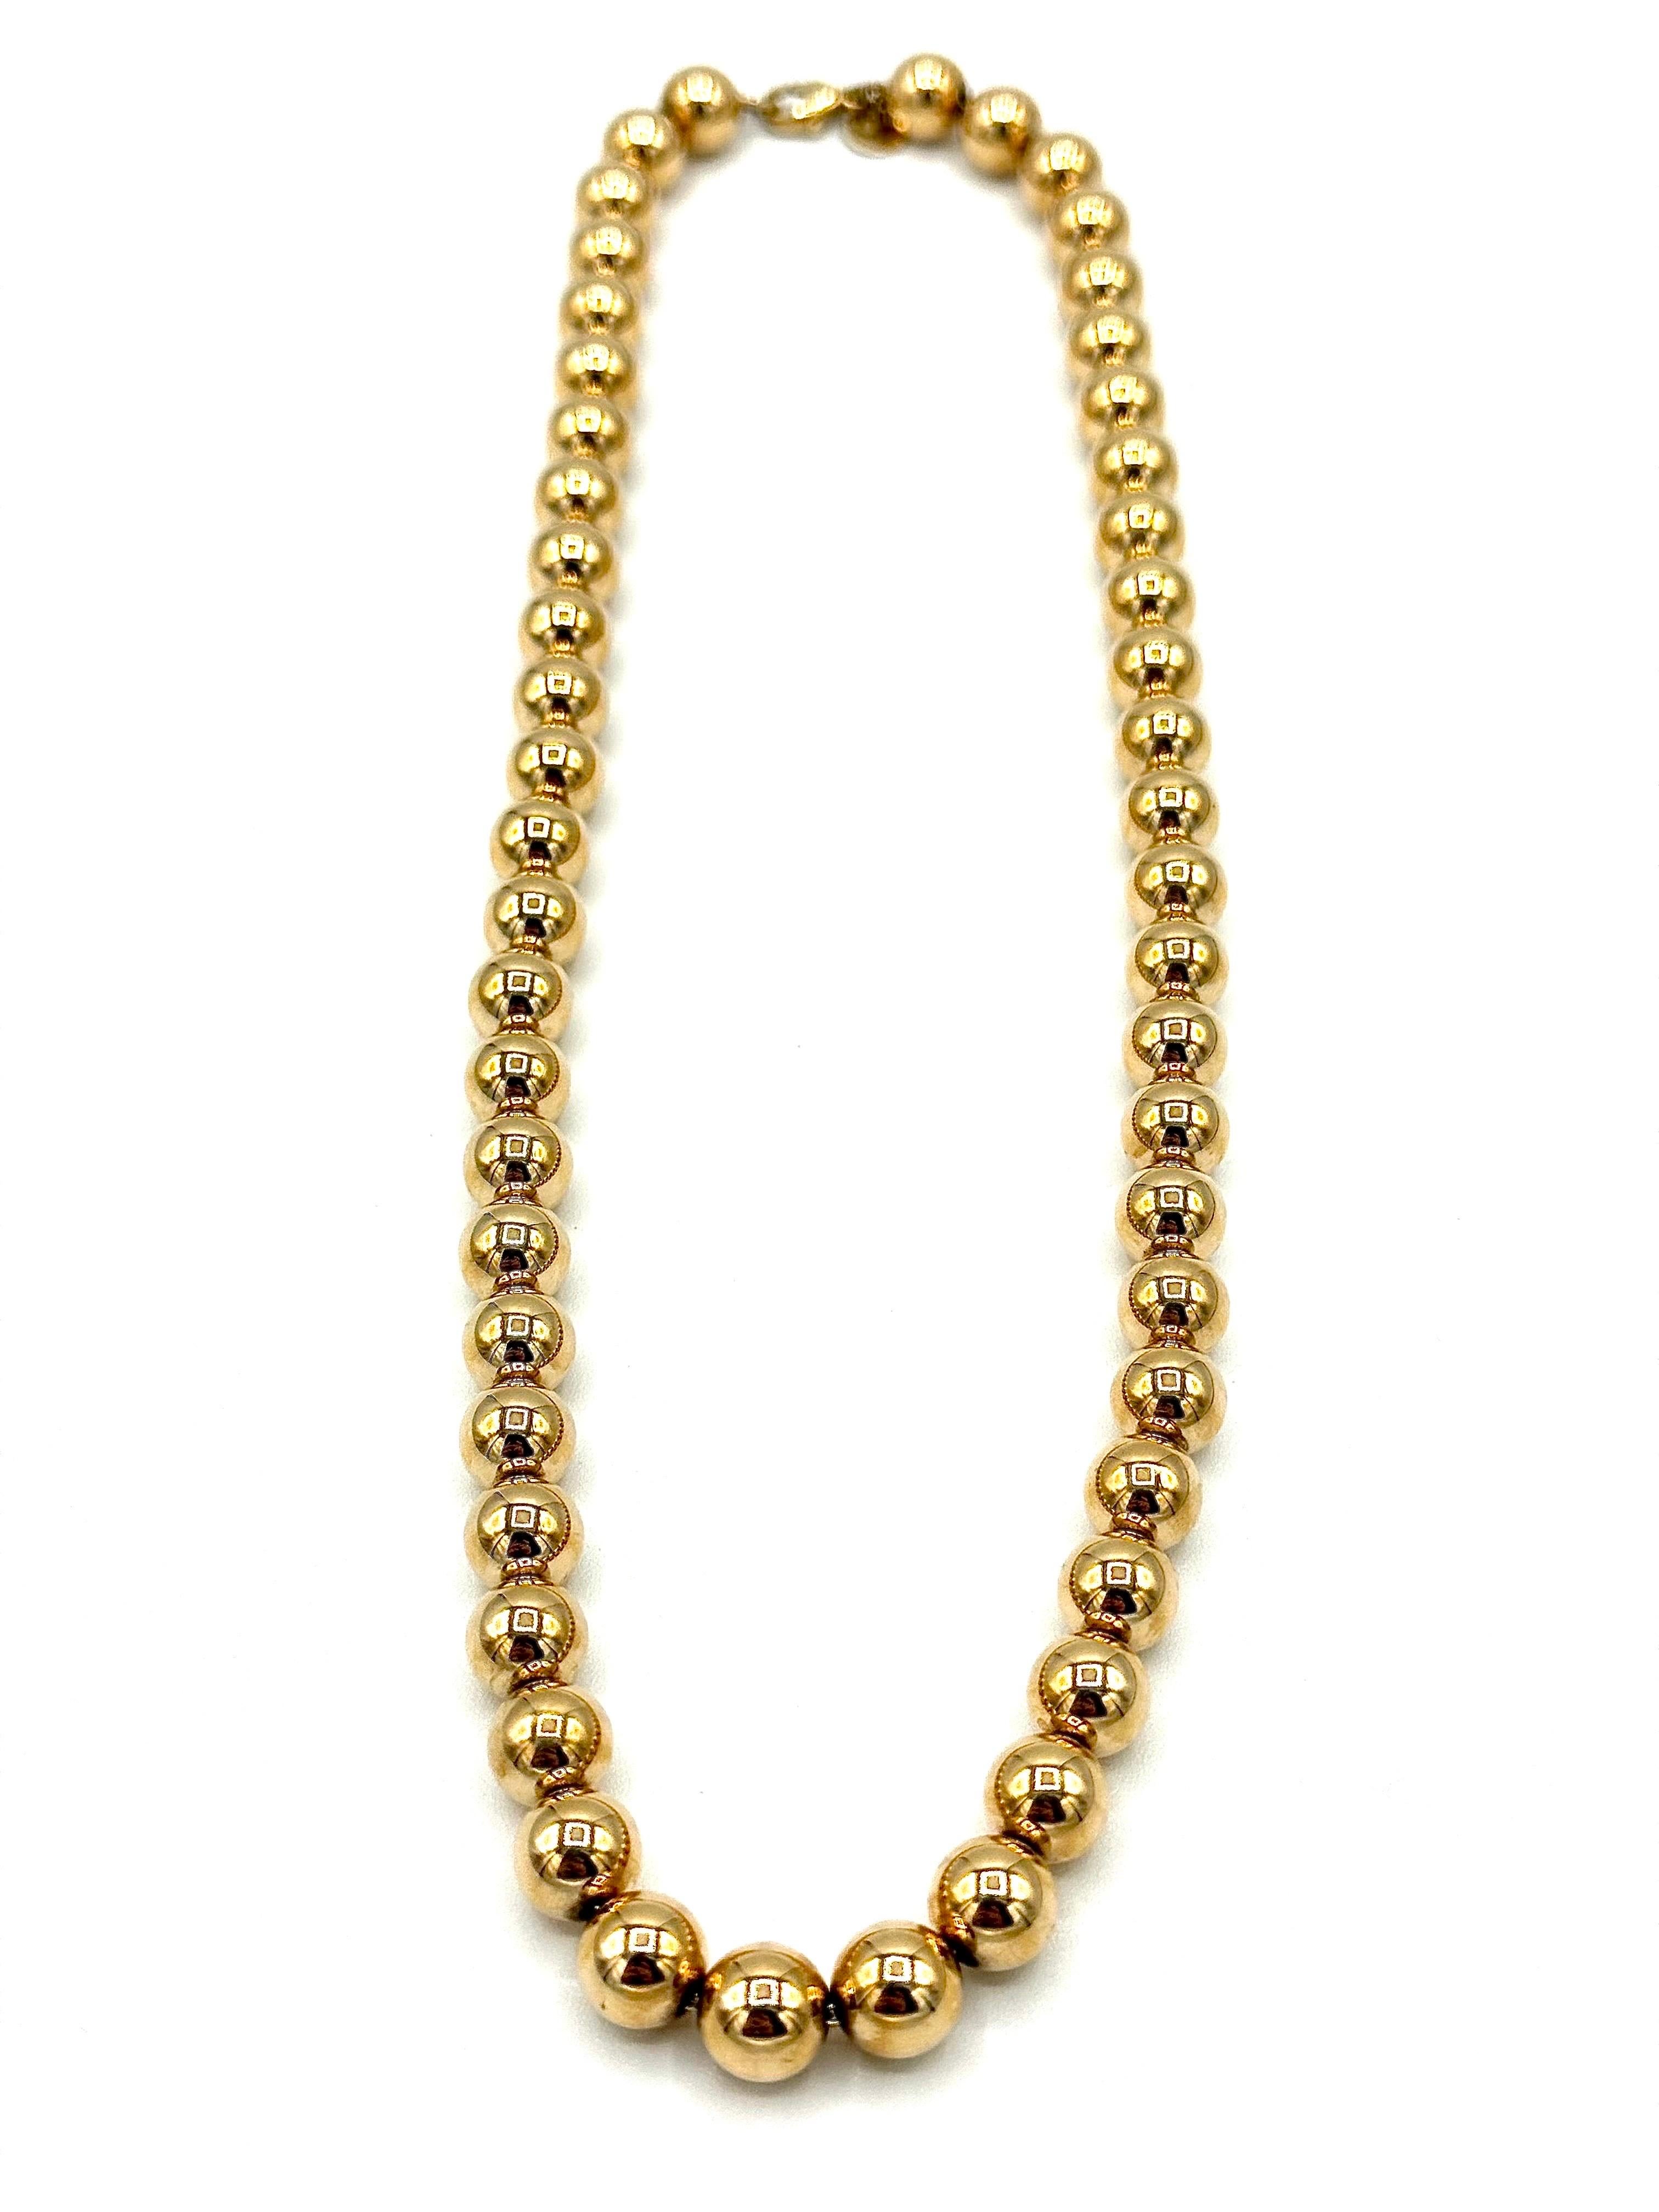 A perfect for every occasion Tiffany & Co. gold necklace.  The necklace is designed with 8.20mm 14K yellow gold ball beads all the way around on a 14K yellow gold chain with a lobster claw clasp.  It is 18 inches in length and has a tag next to the